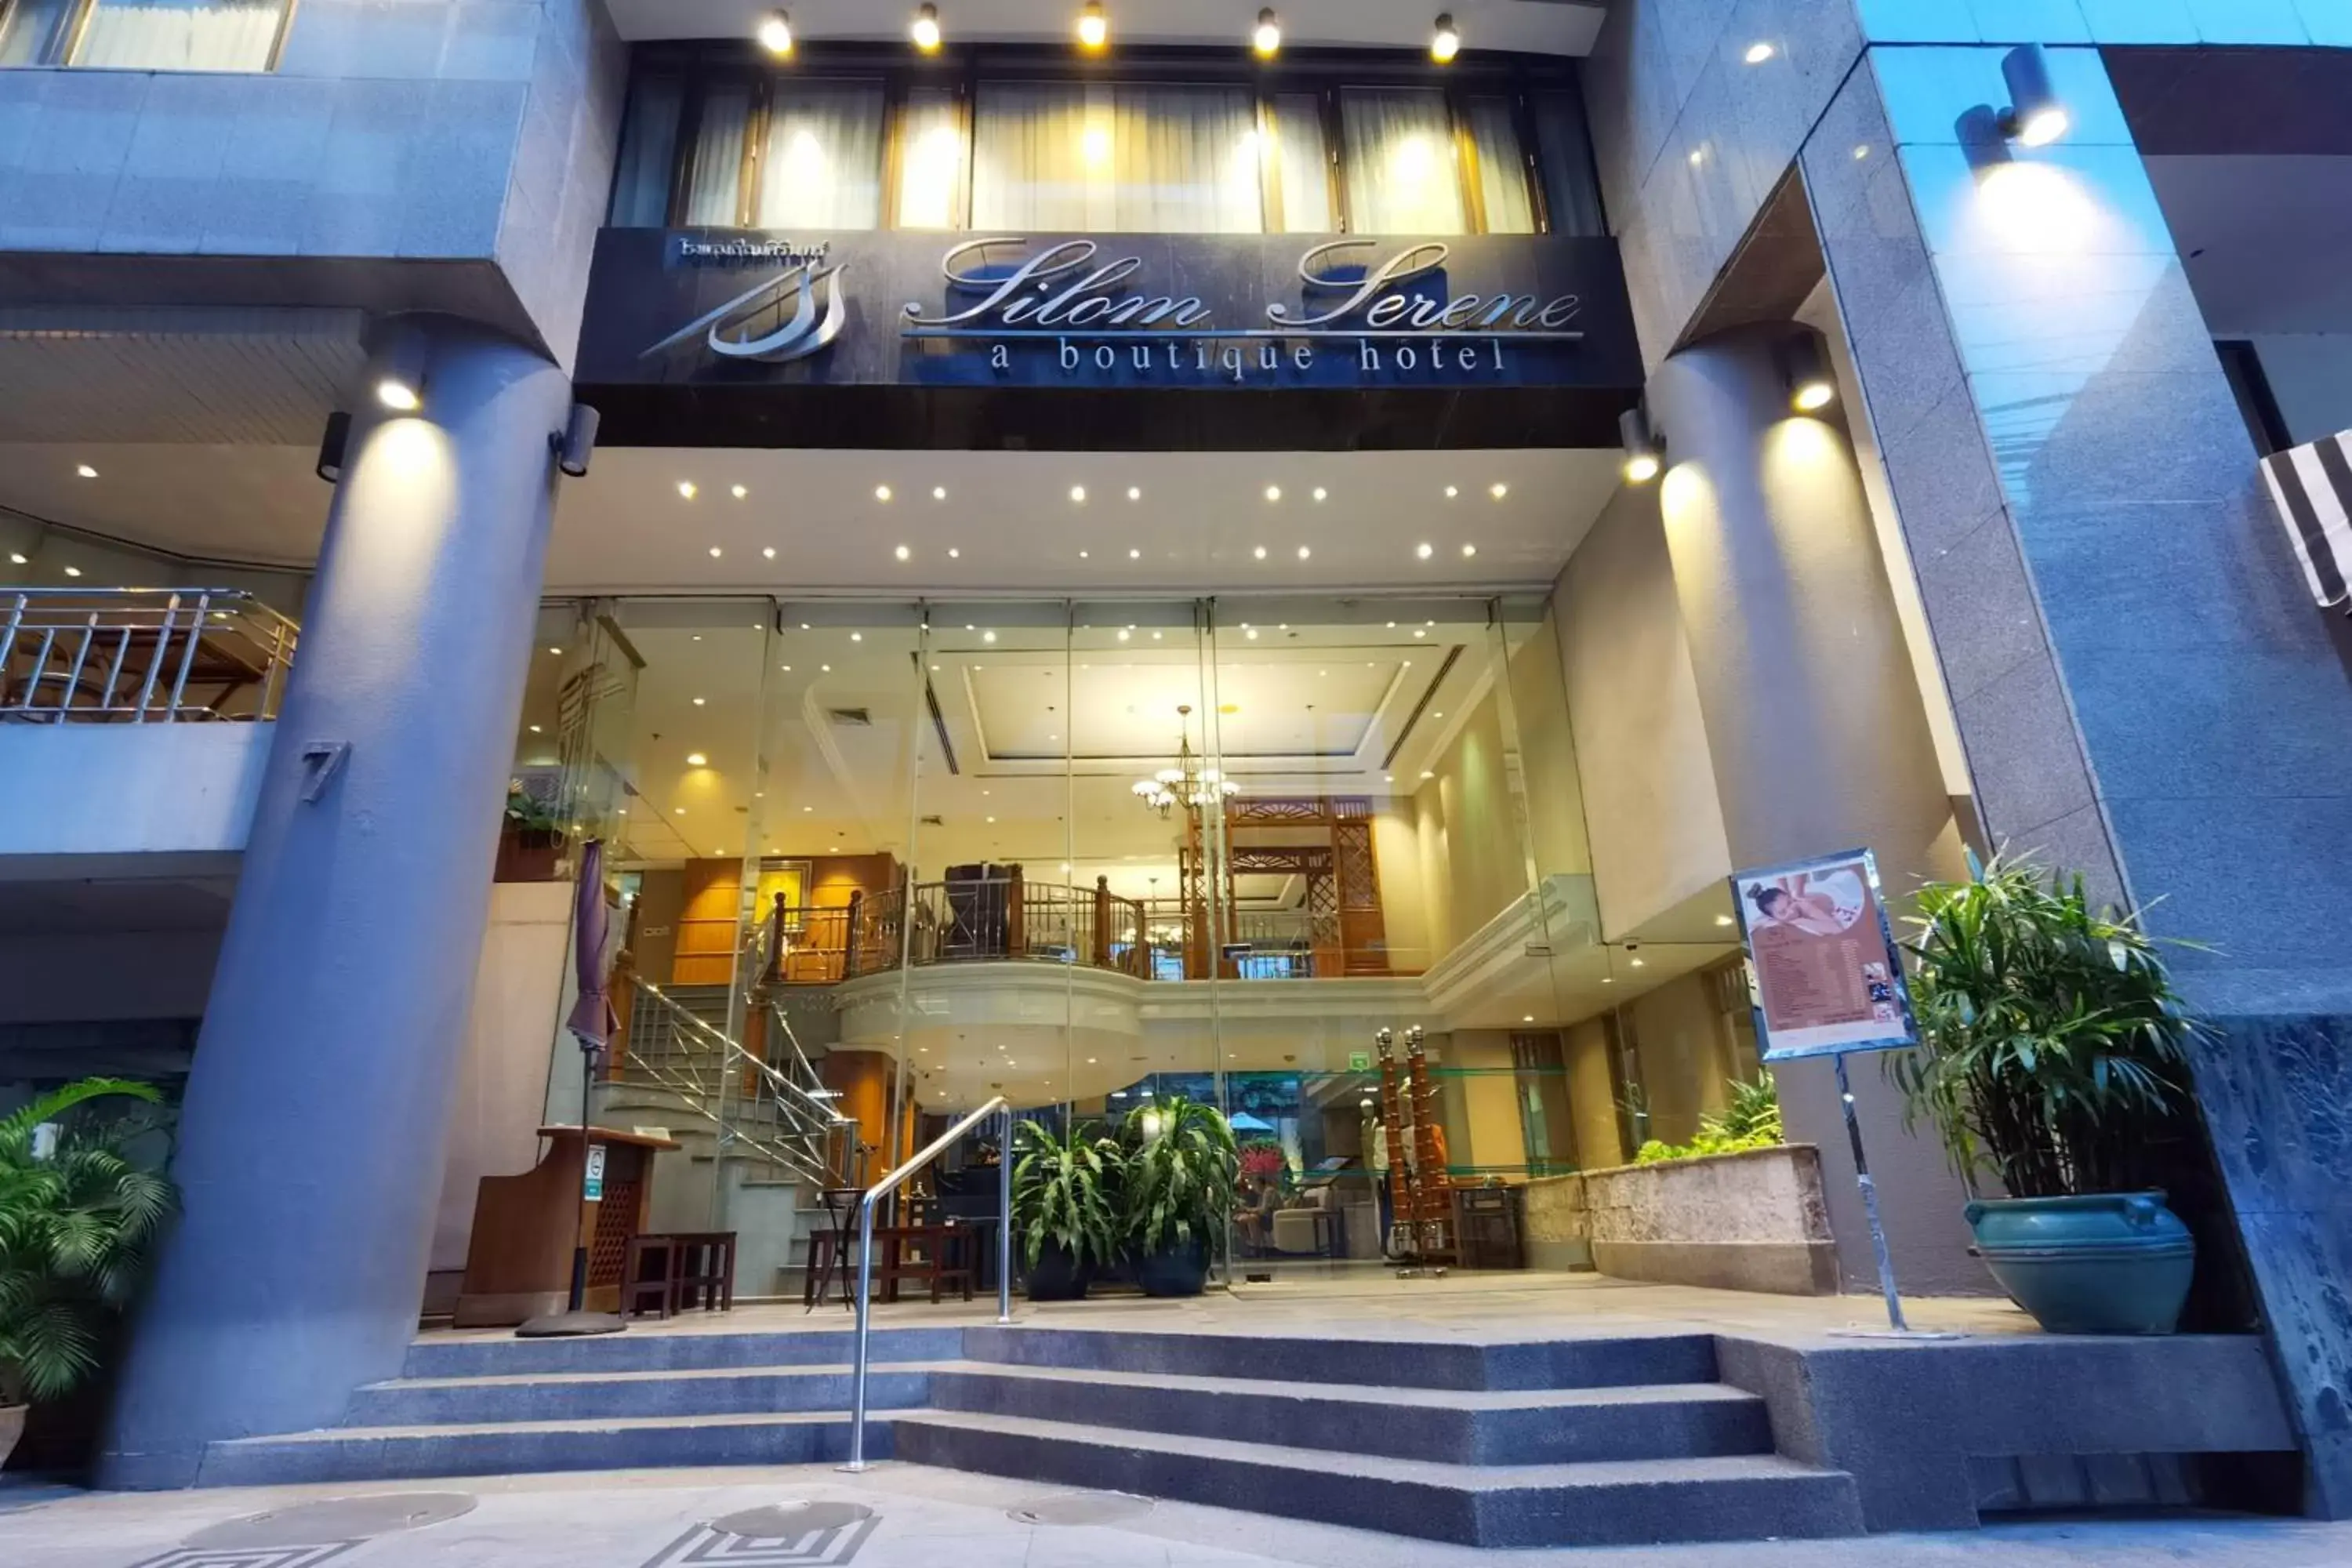 Property building in Silom Serene A Boutique Hotel - SHA Extra Plus